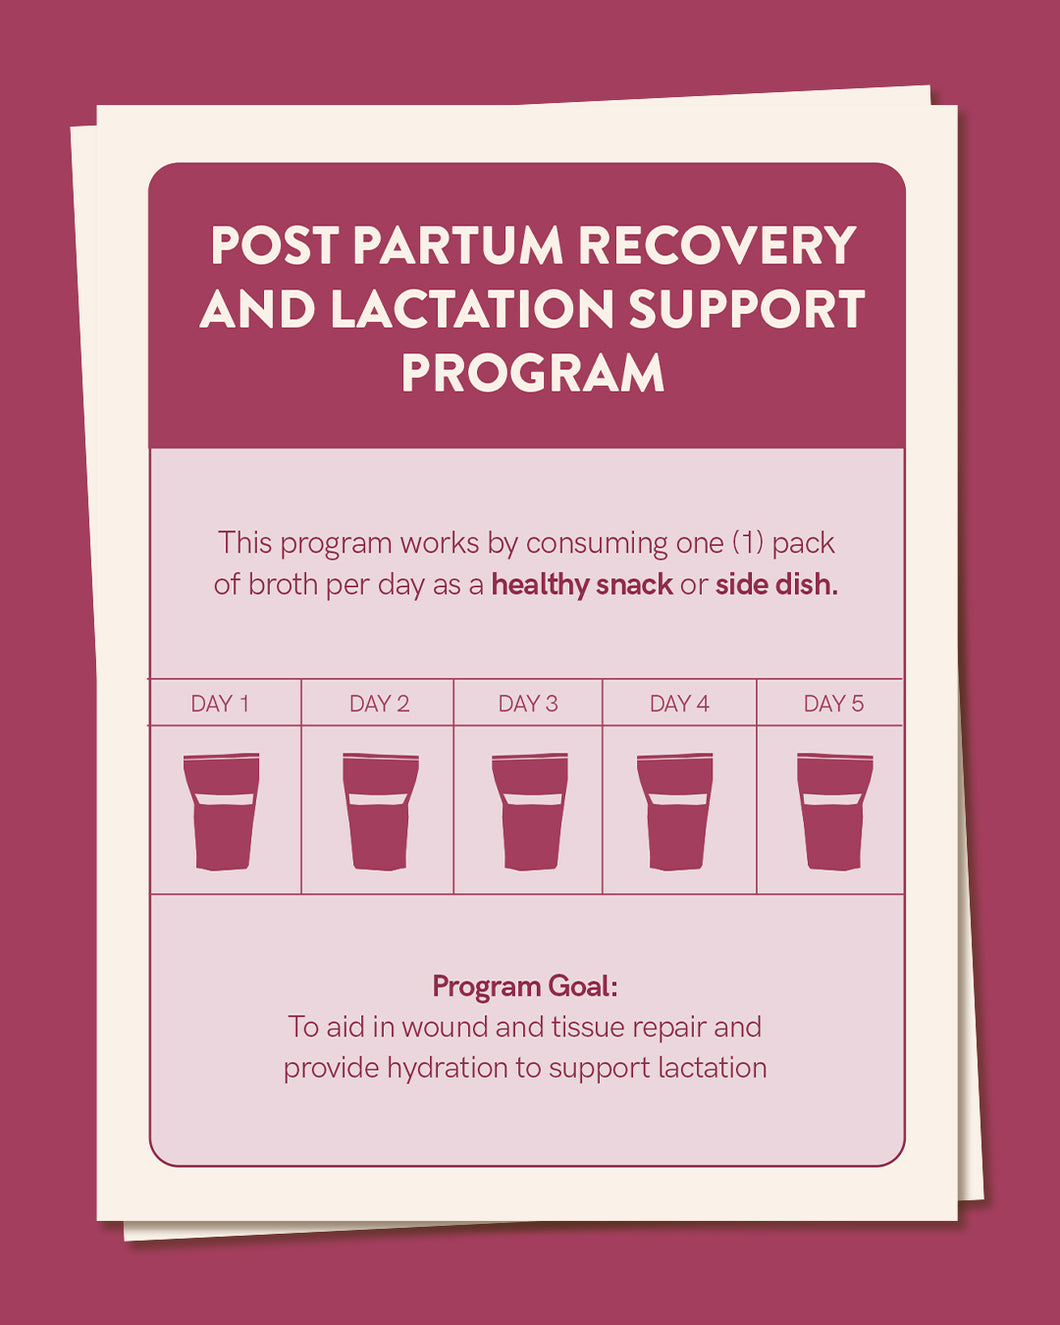 Post Partum Recovery and Lactation Support Program